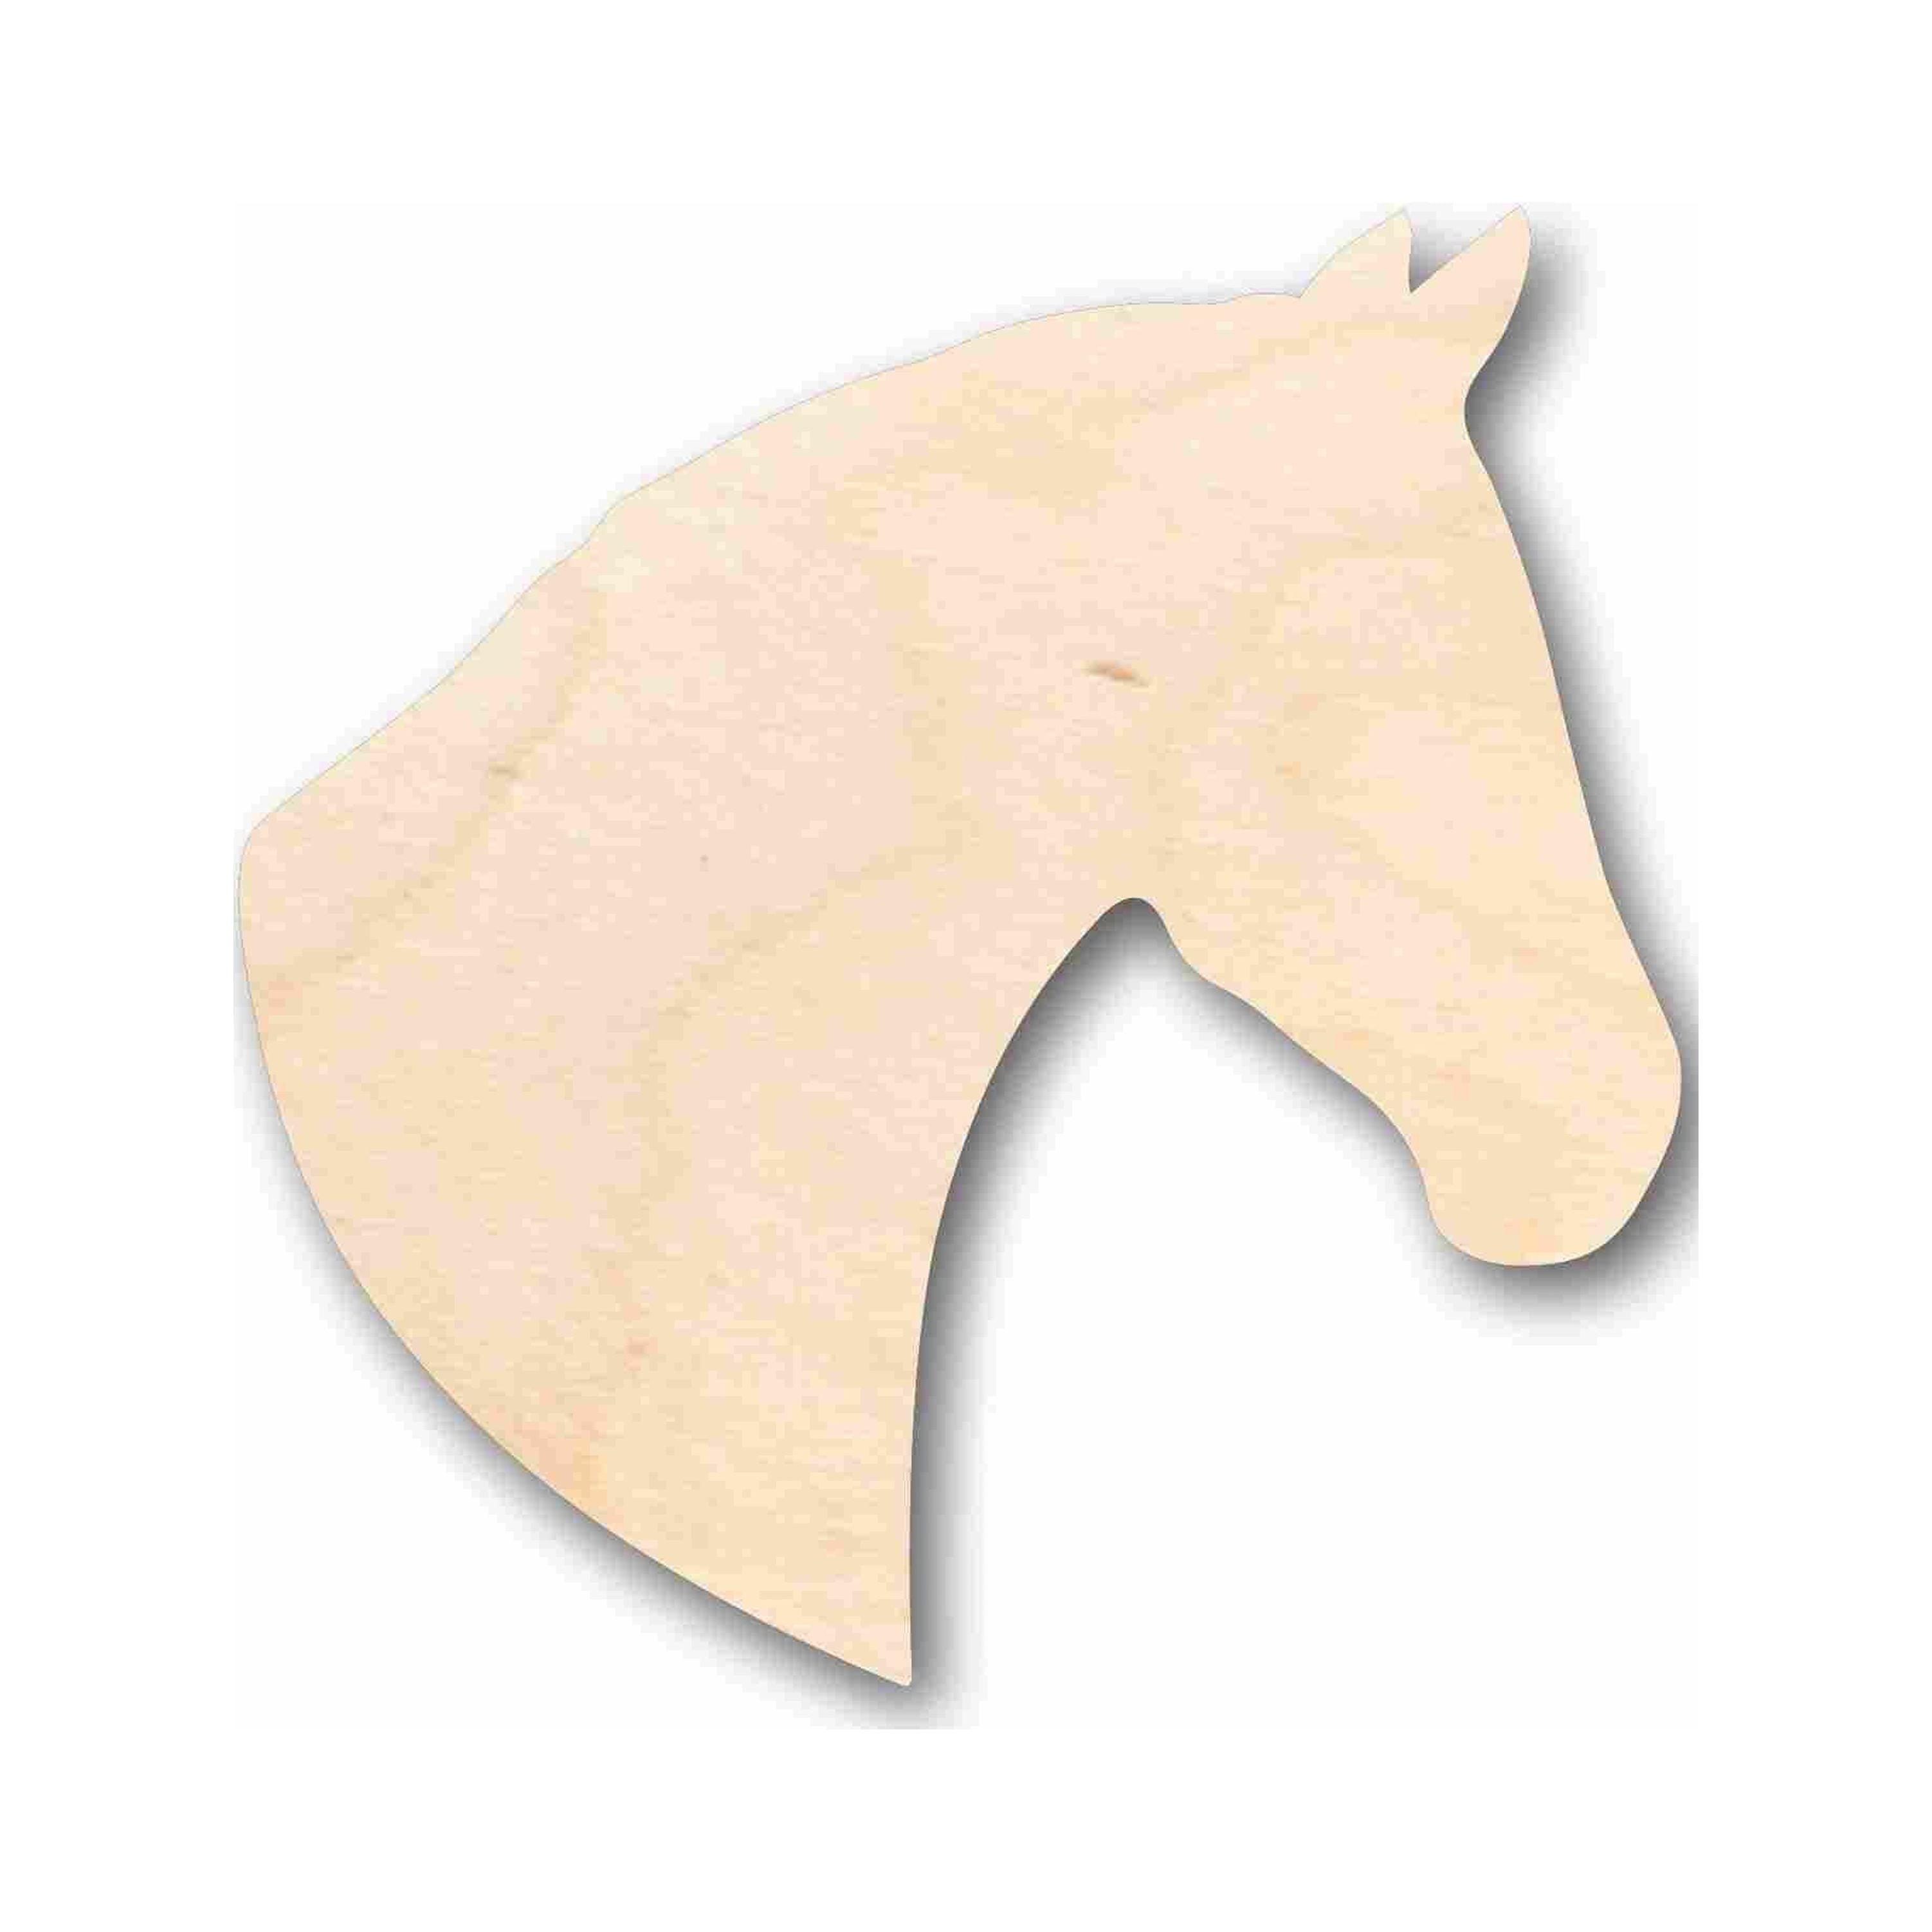 Horse Shoe multiple Sizes Cutouts Wood Craft Supply-sanded or